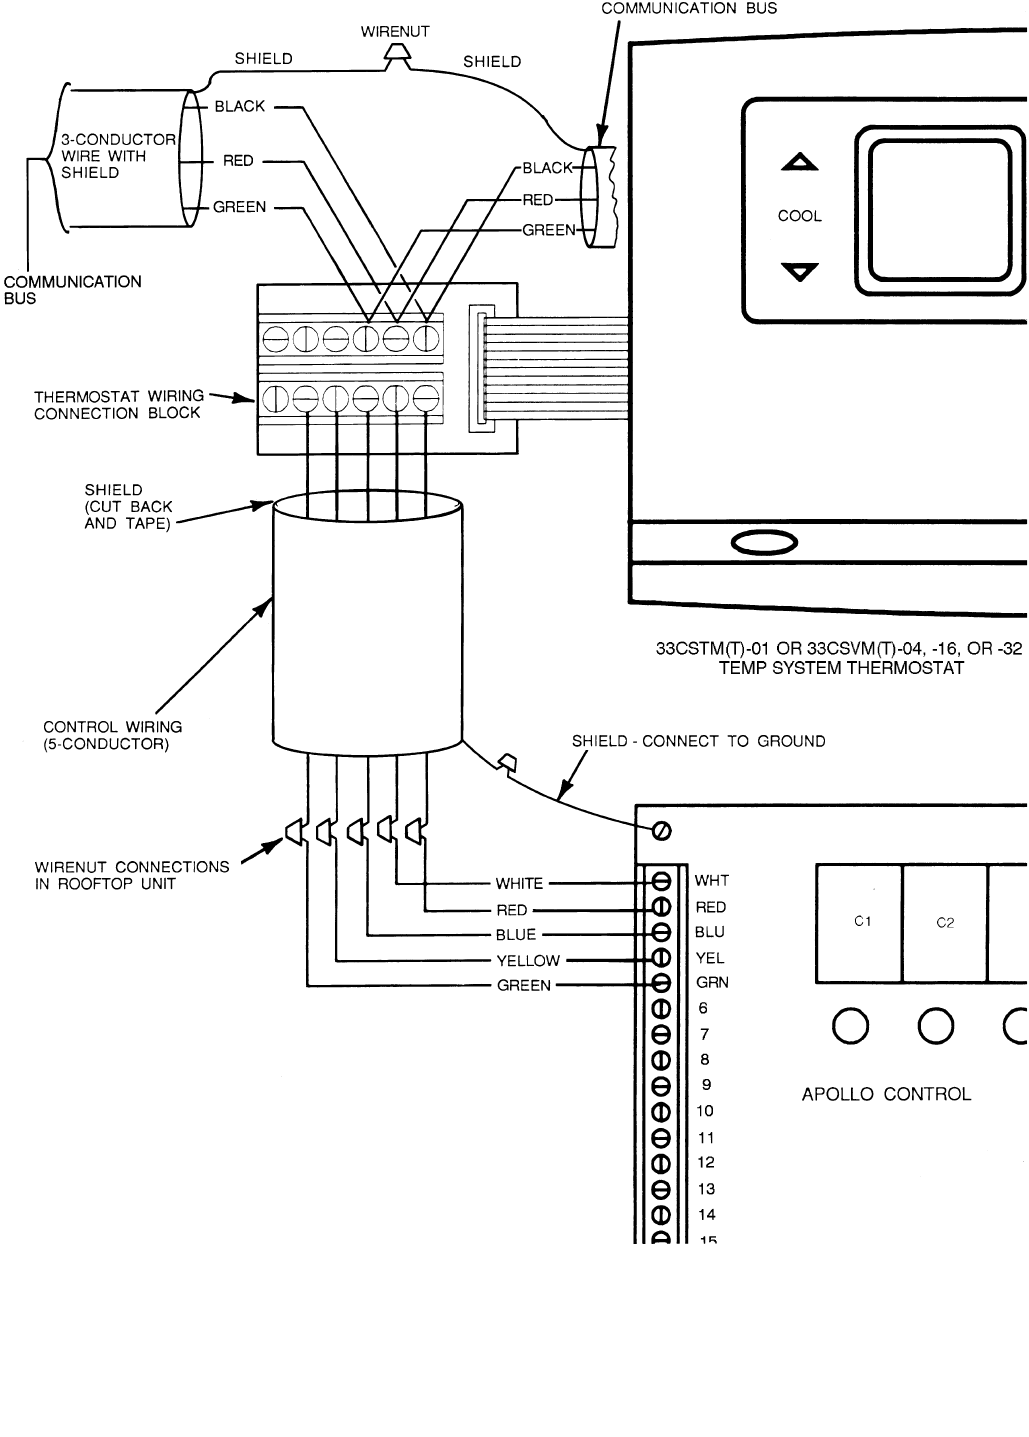 Wiring Diagram Carrier Thermostat - Wiring Diagram Gallery